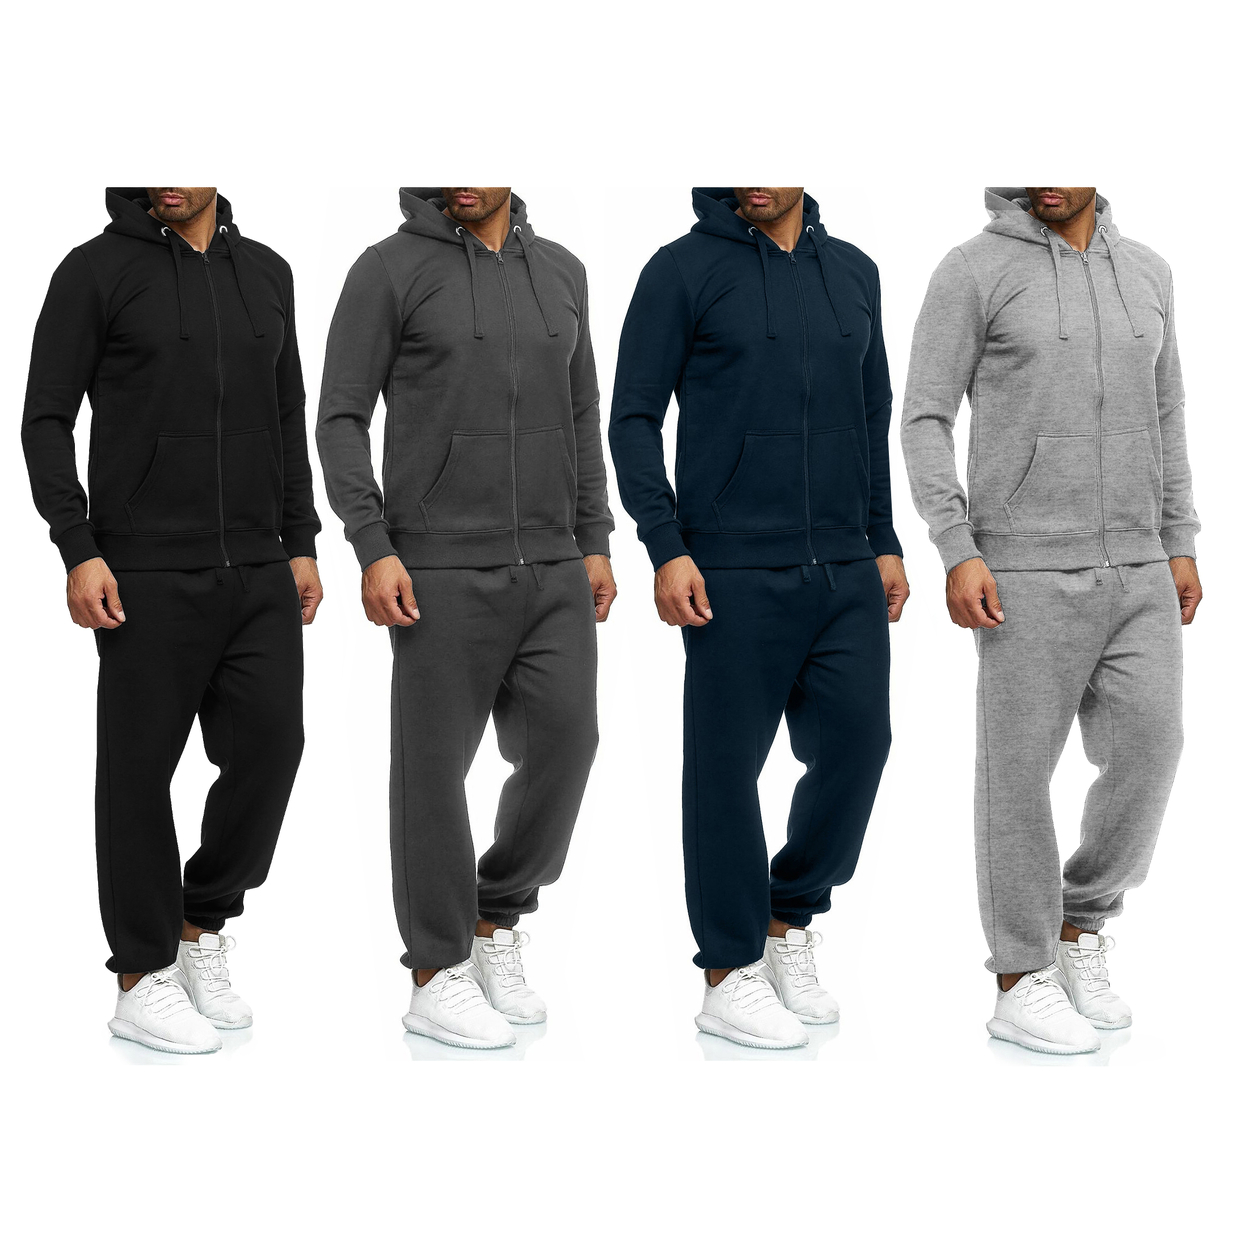 2-Pack: Men's Casual Big & Tall Athletic Active Winter Warm Fleece Lined Full Zip Tracksuit Jogger Set - Charcoal, Large